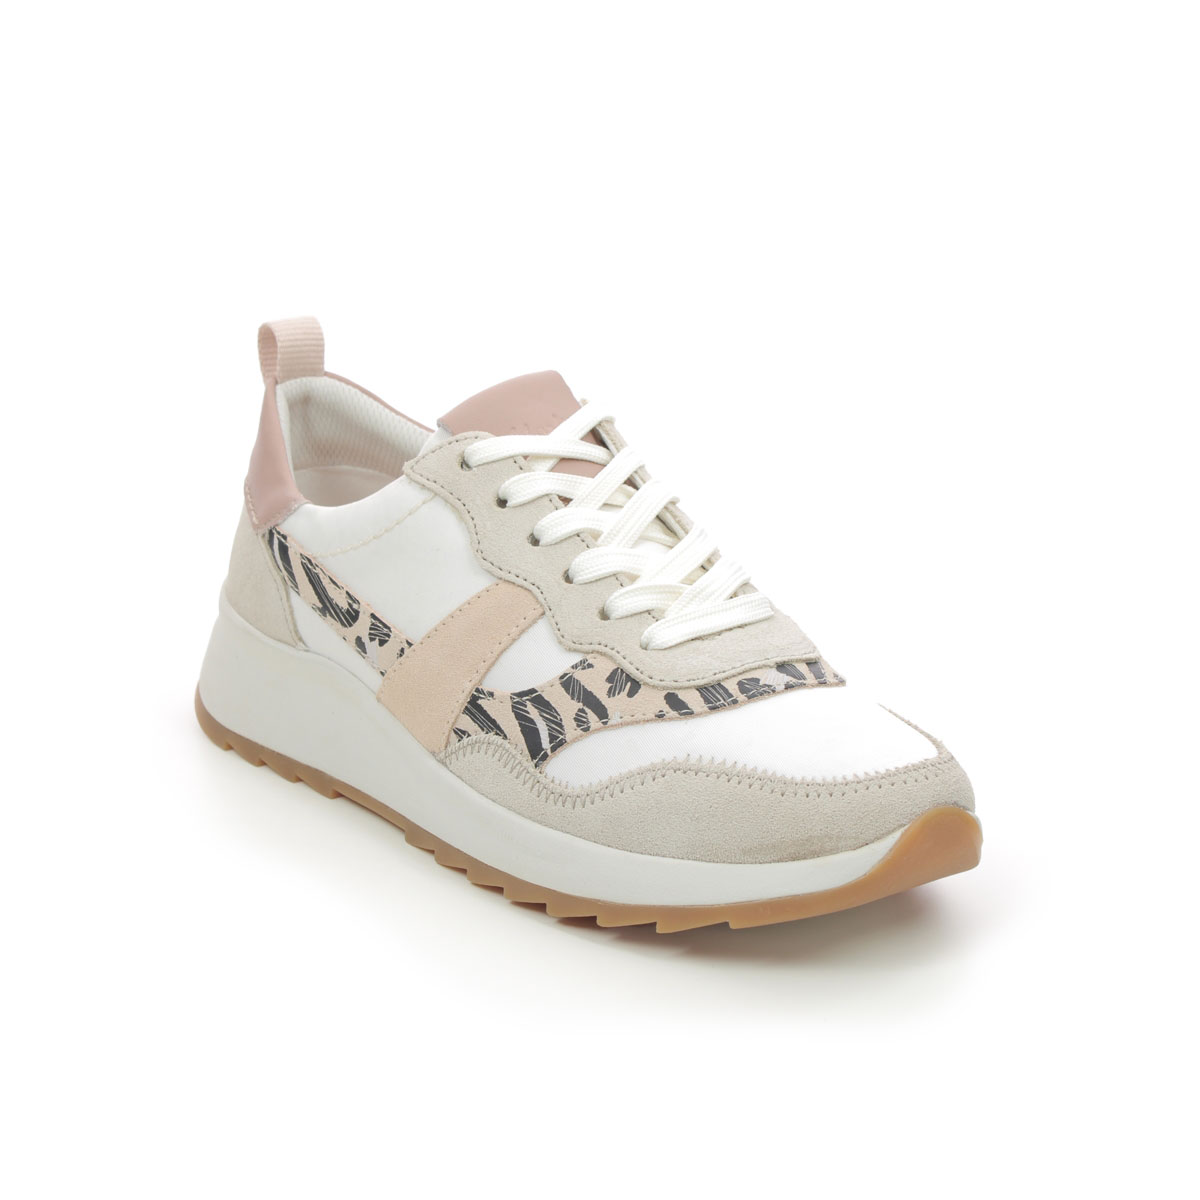 Clarks Dashlite Jazz White Pink Womens Trainers 704294D In Size 5.5 In Plain White Pink